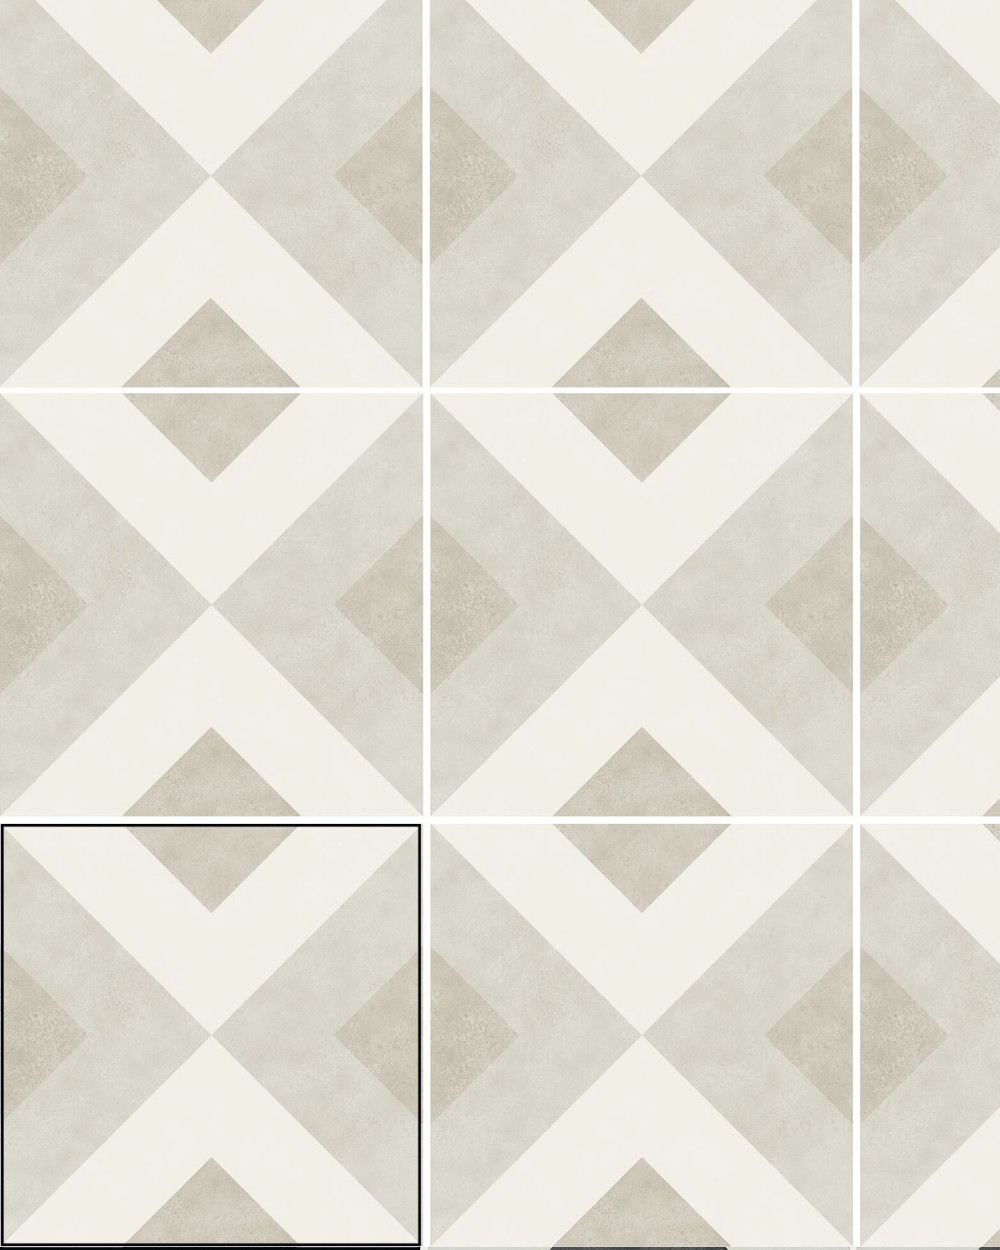 Motif tiles with squares Grey White | BRIANNA PUMICE 15X15 cm